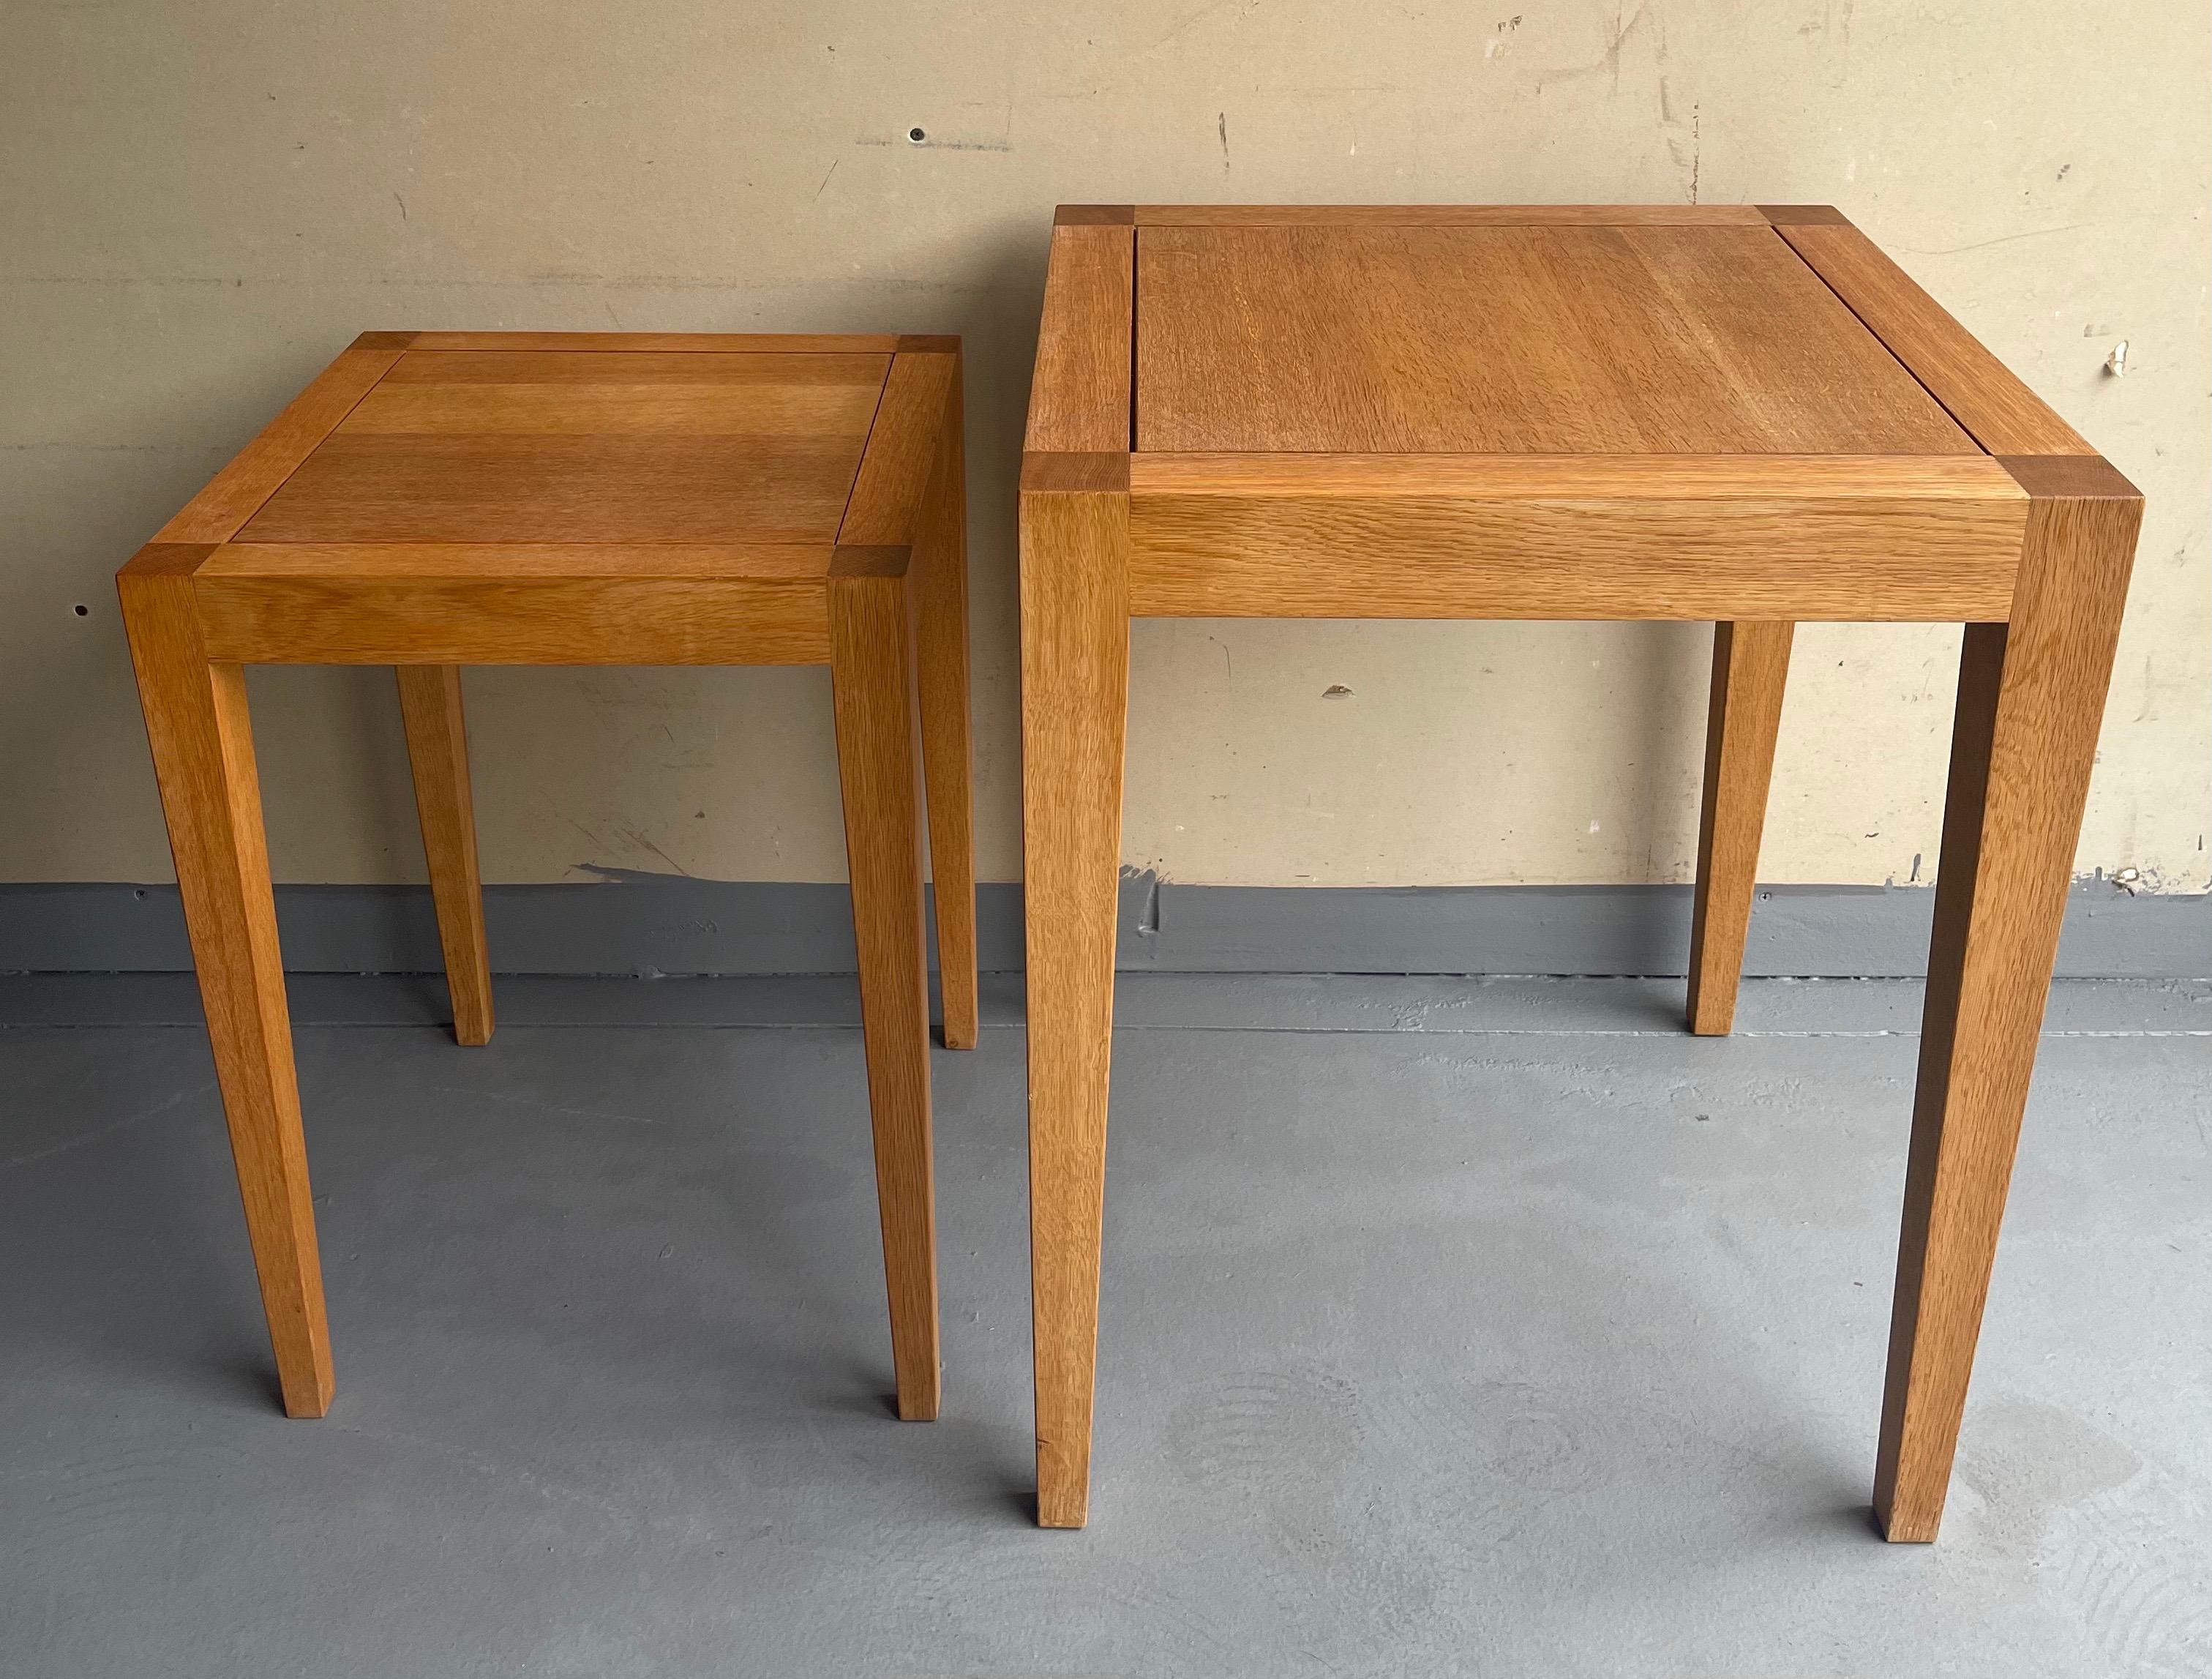 20th Century Pair of Organic Modern Square Nesting Tables by Gunther Lambert For Sale